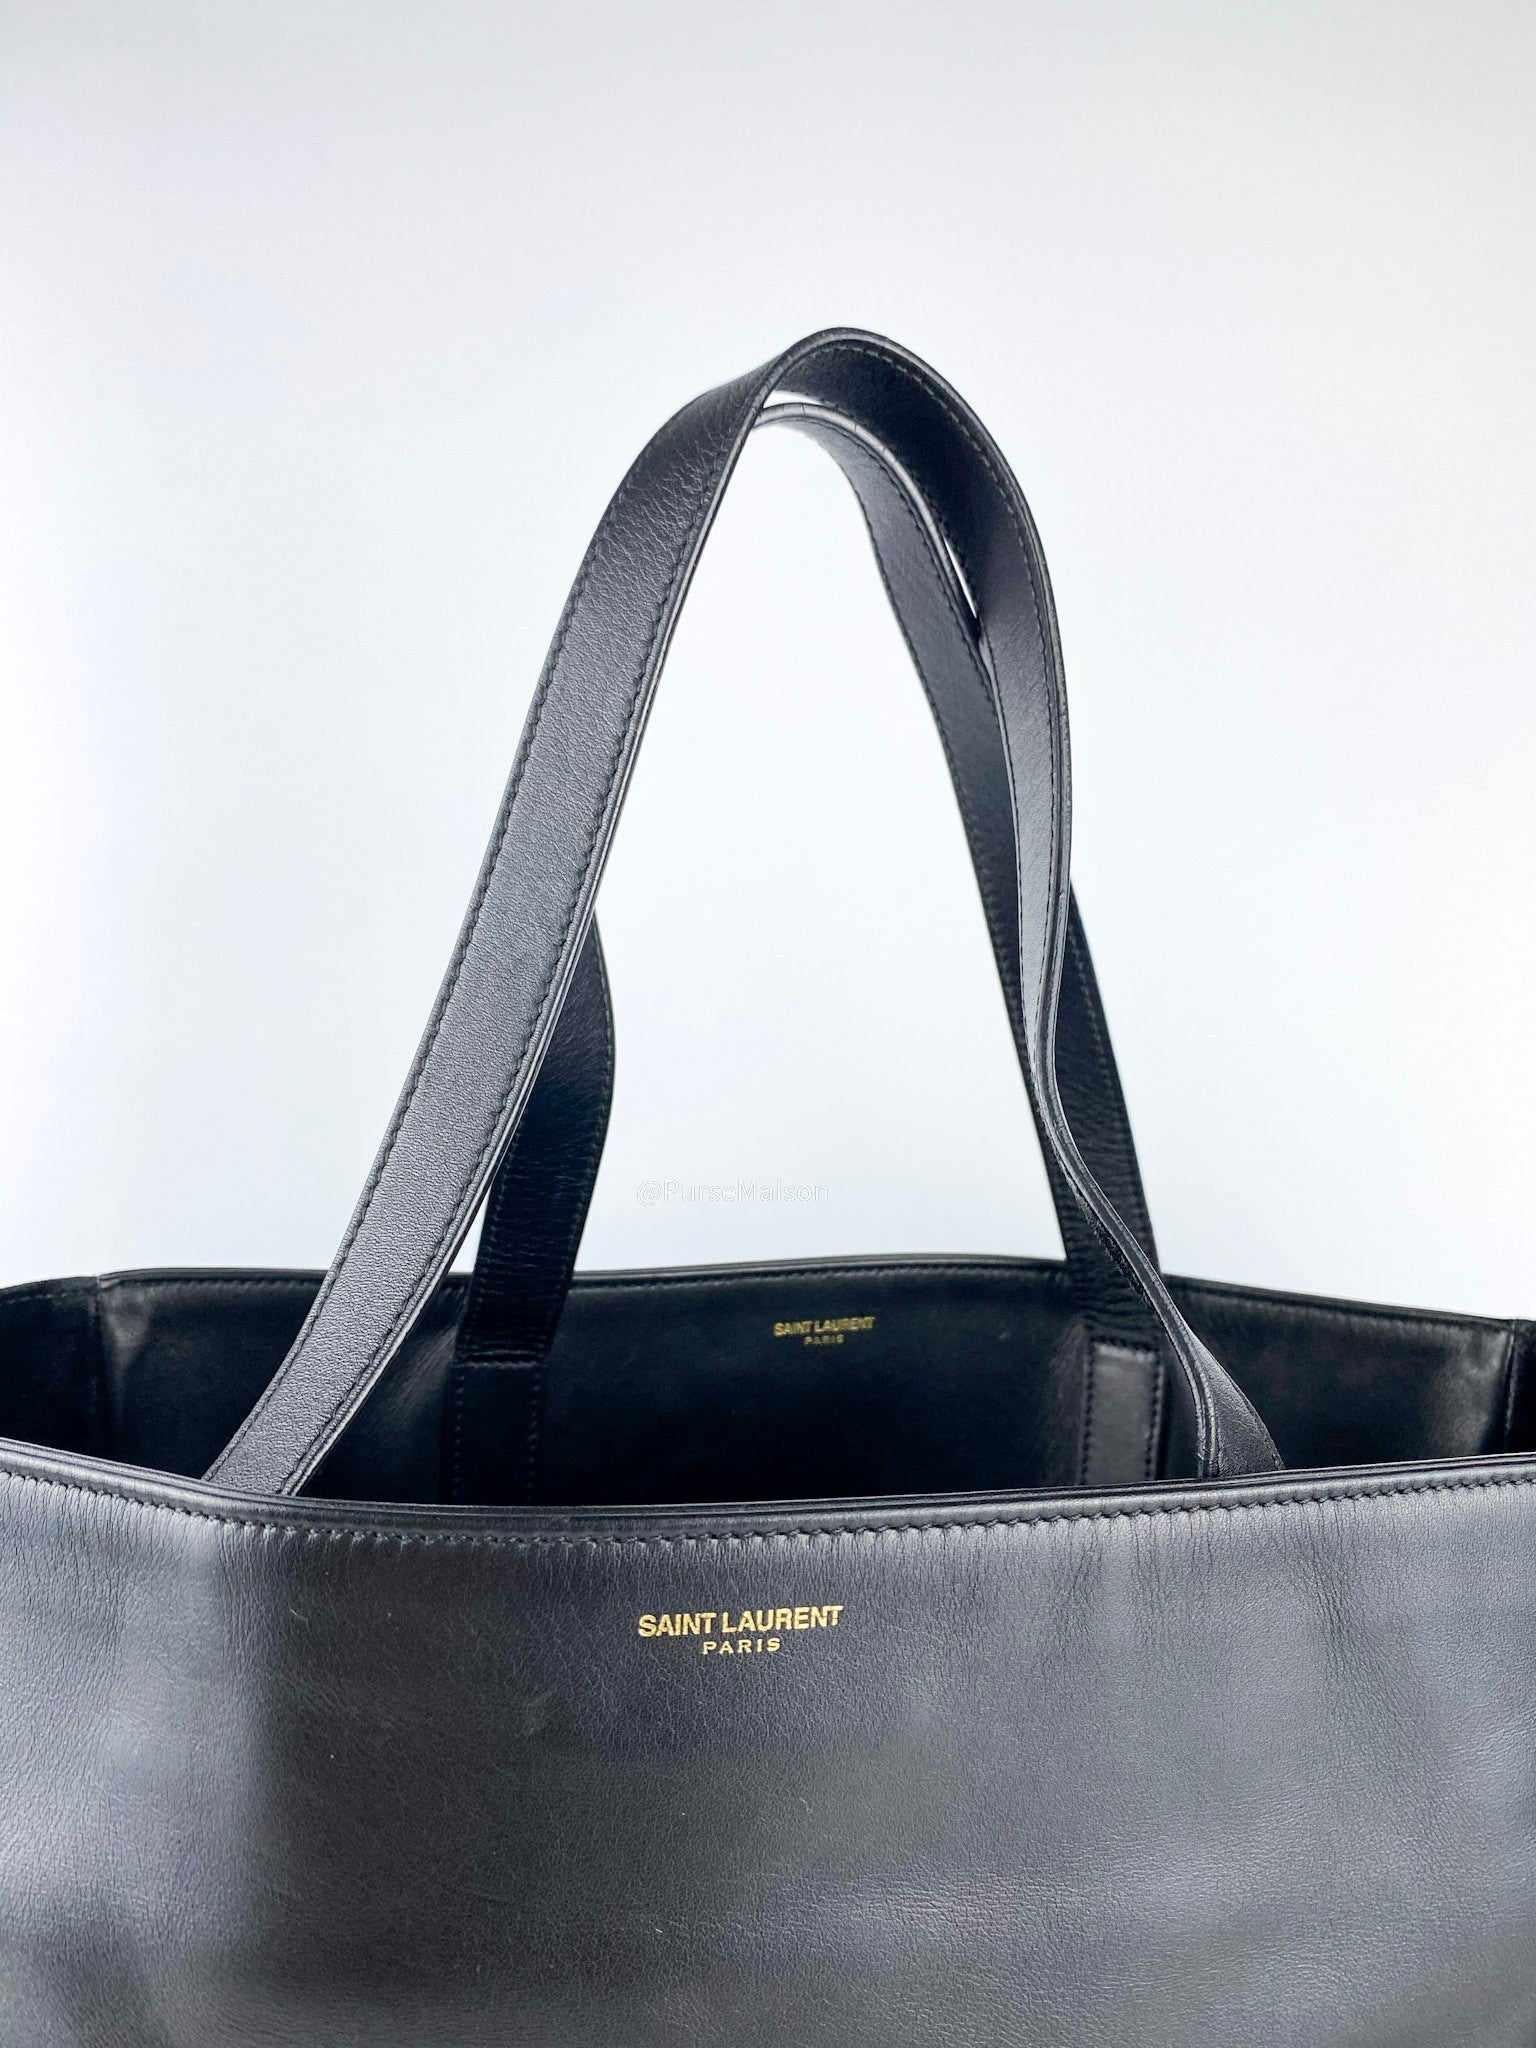 Yves Saint Laurent Cabas Reversible Leather Suede Shopping Tote Bag